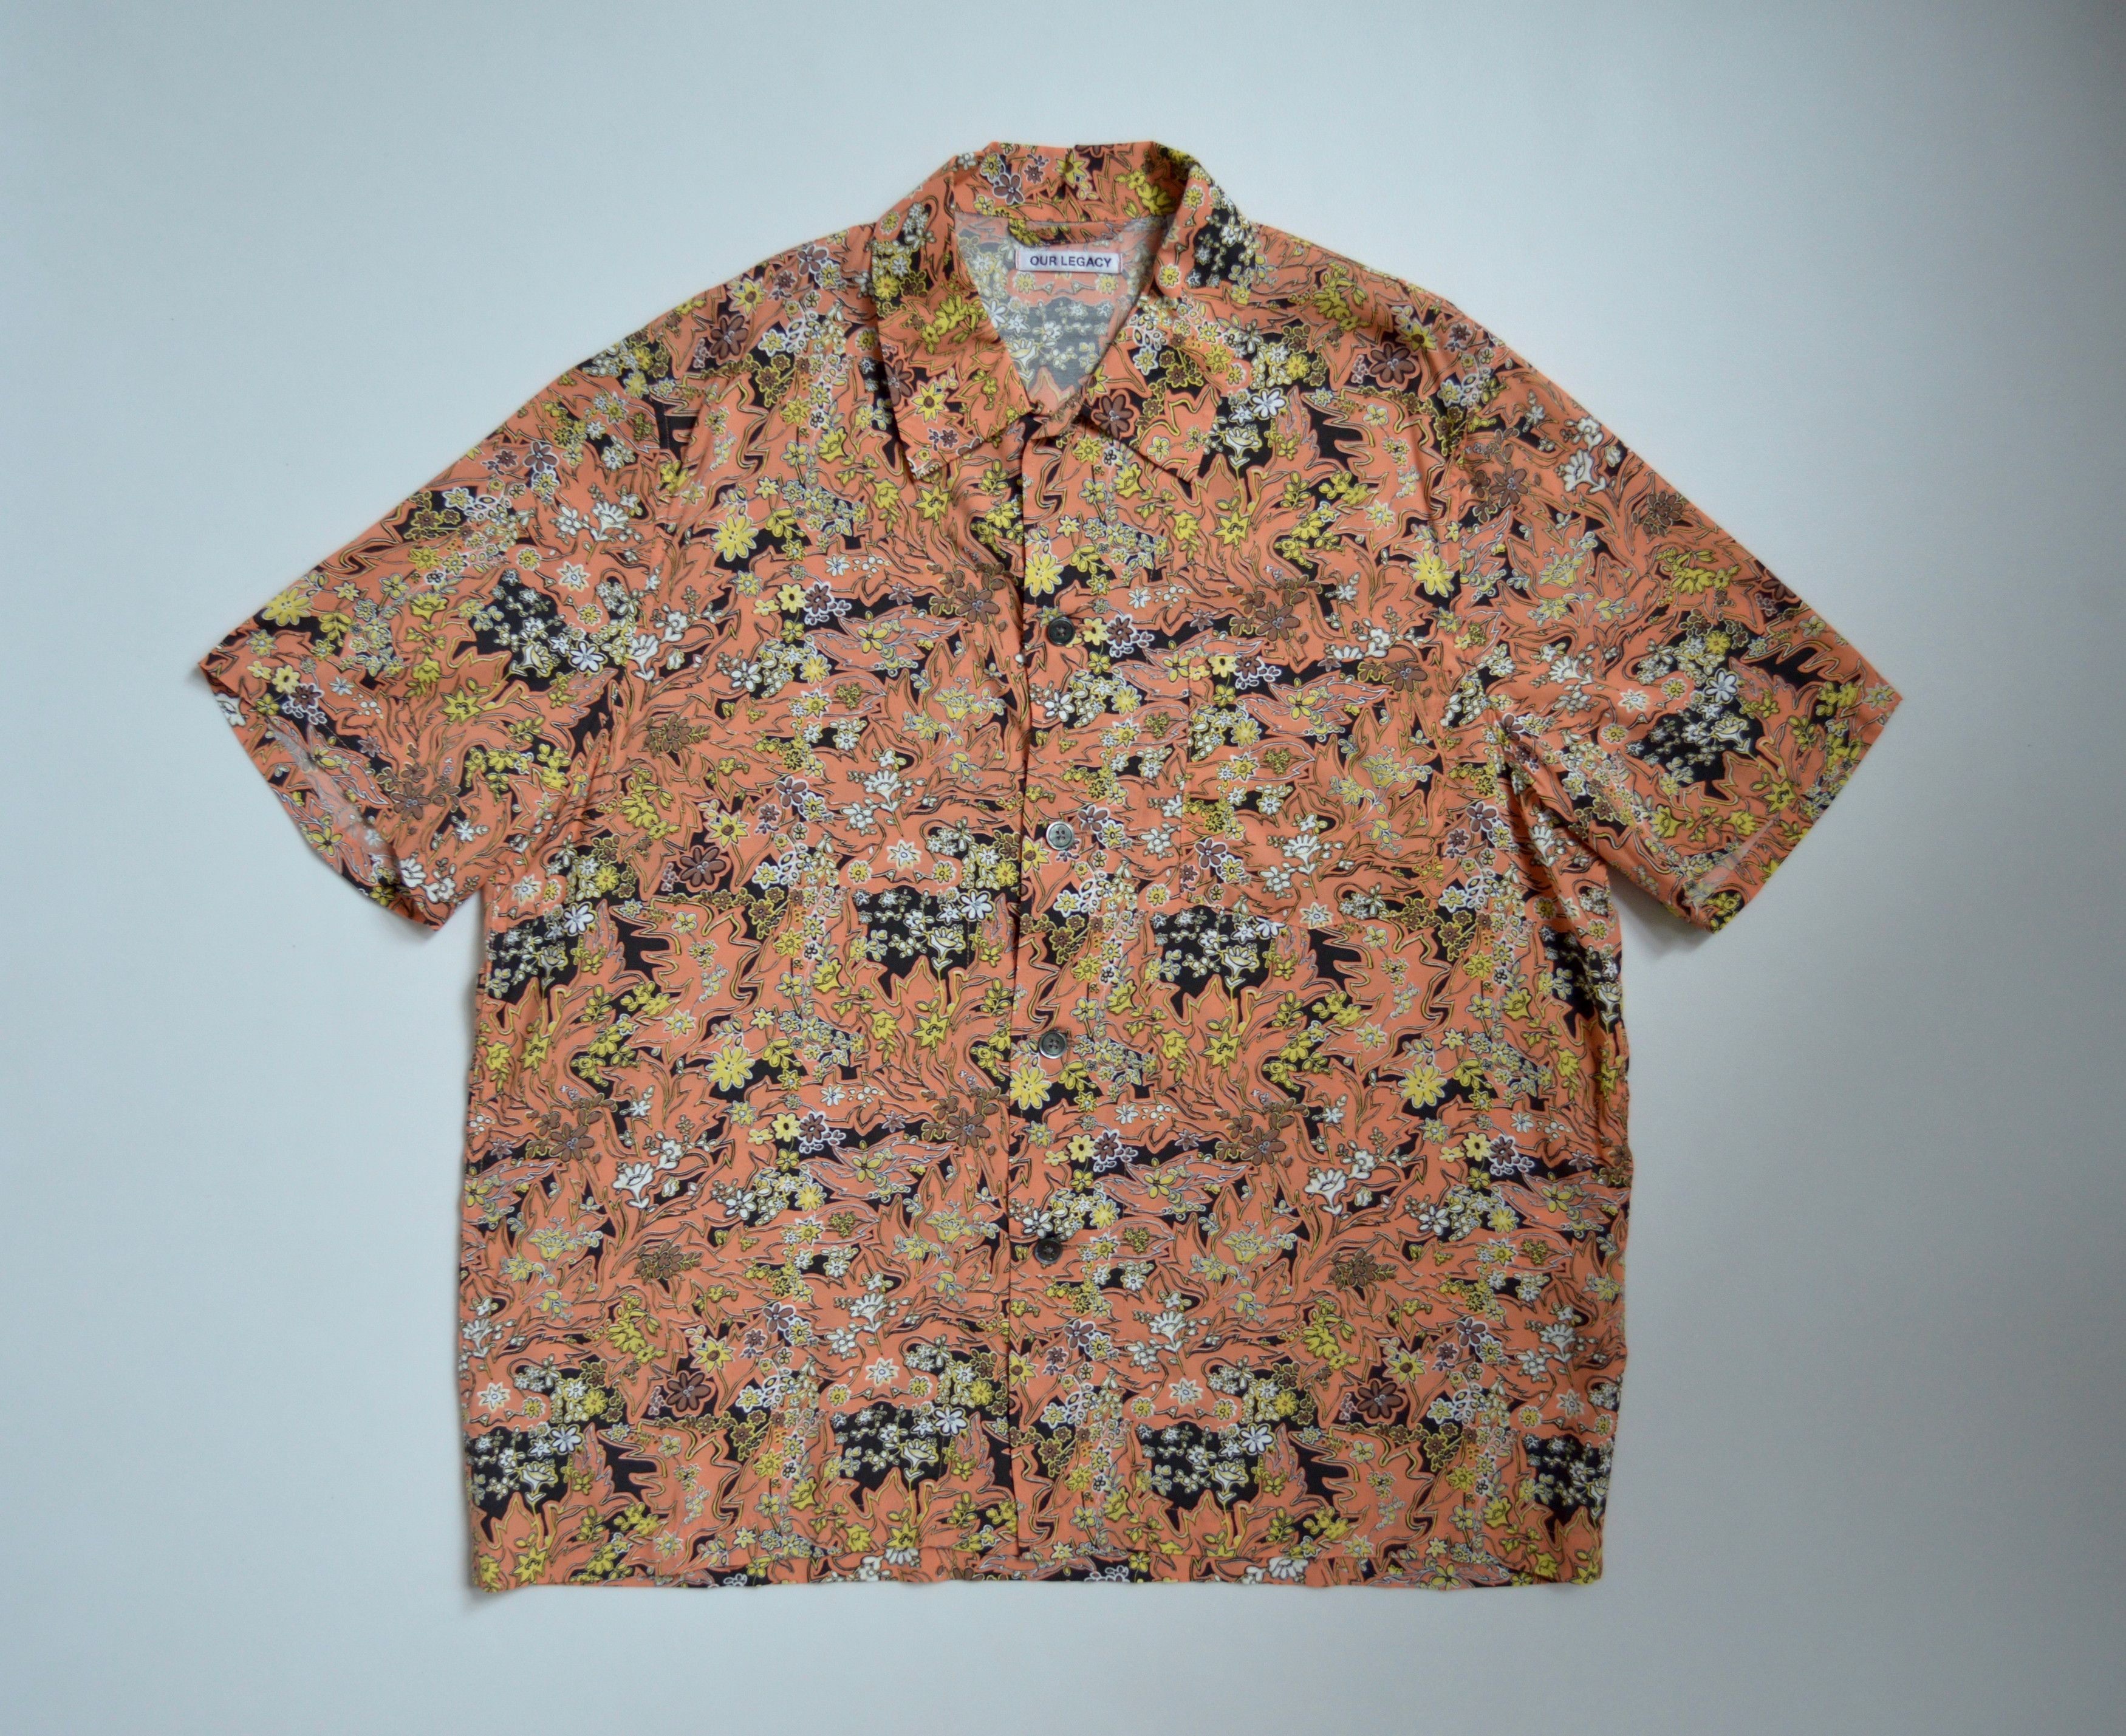 Our Legacy S/S 20 Psychedelic Floral Box Shirt | Grailed